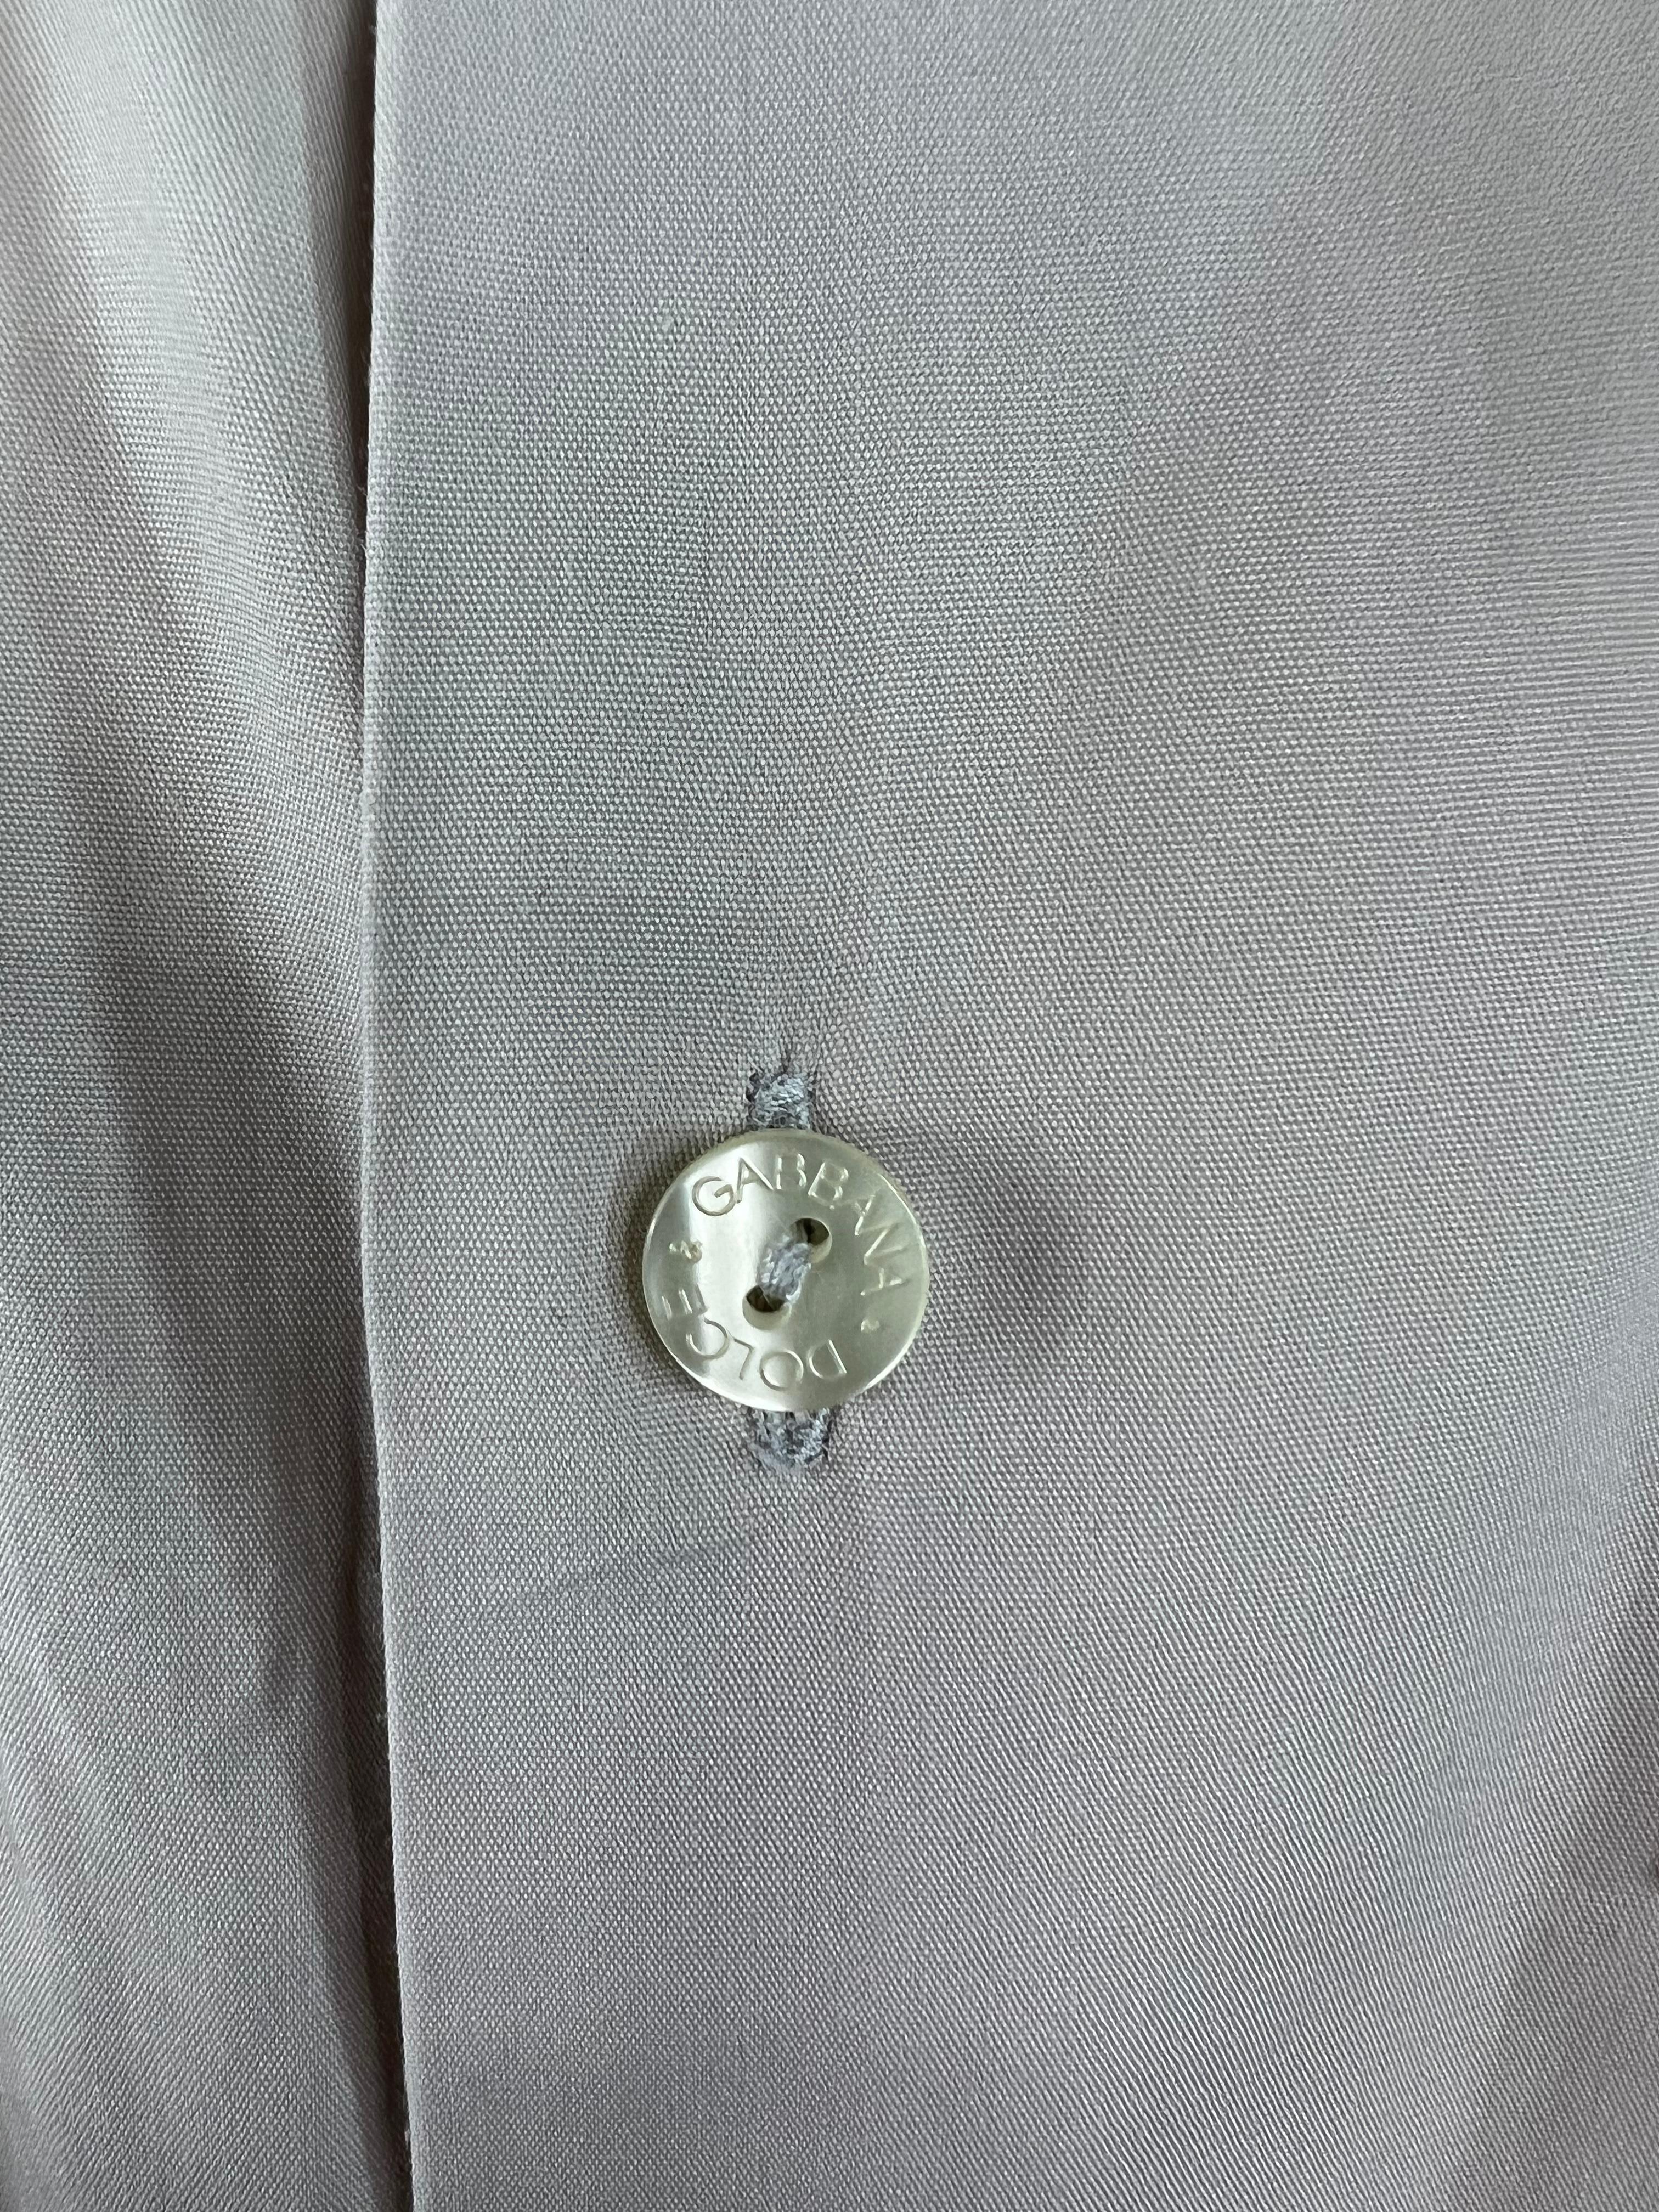 Dolce & Gabbana Beige Button Down Shirt  In Excellent Condition For Sale In Beverly Hills, CA